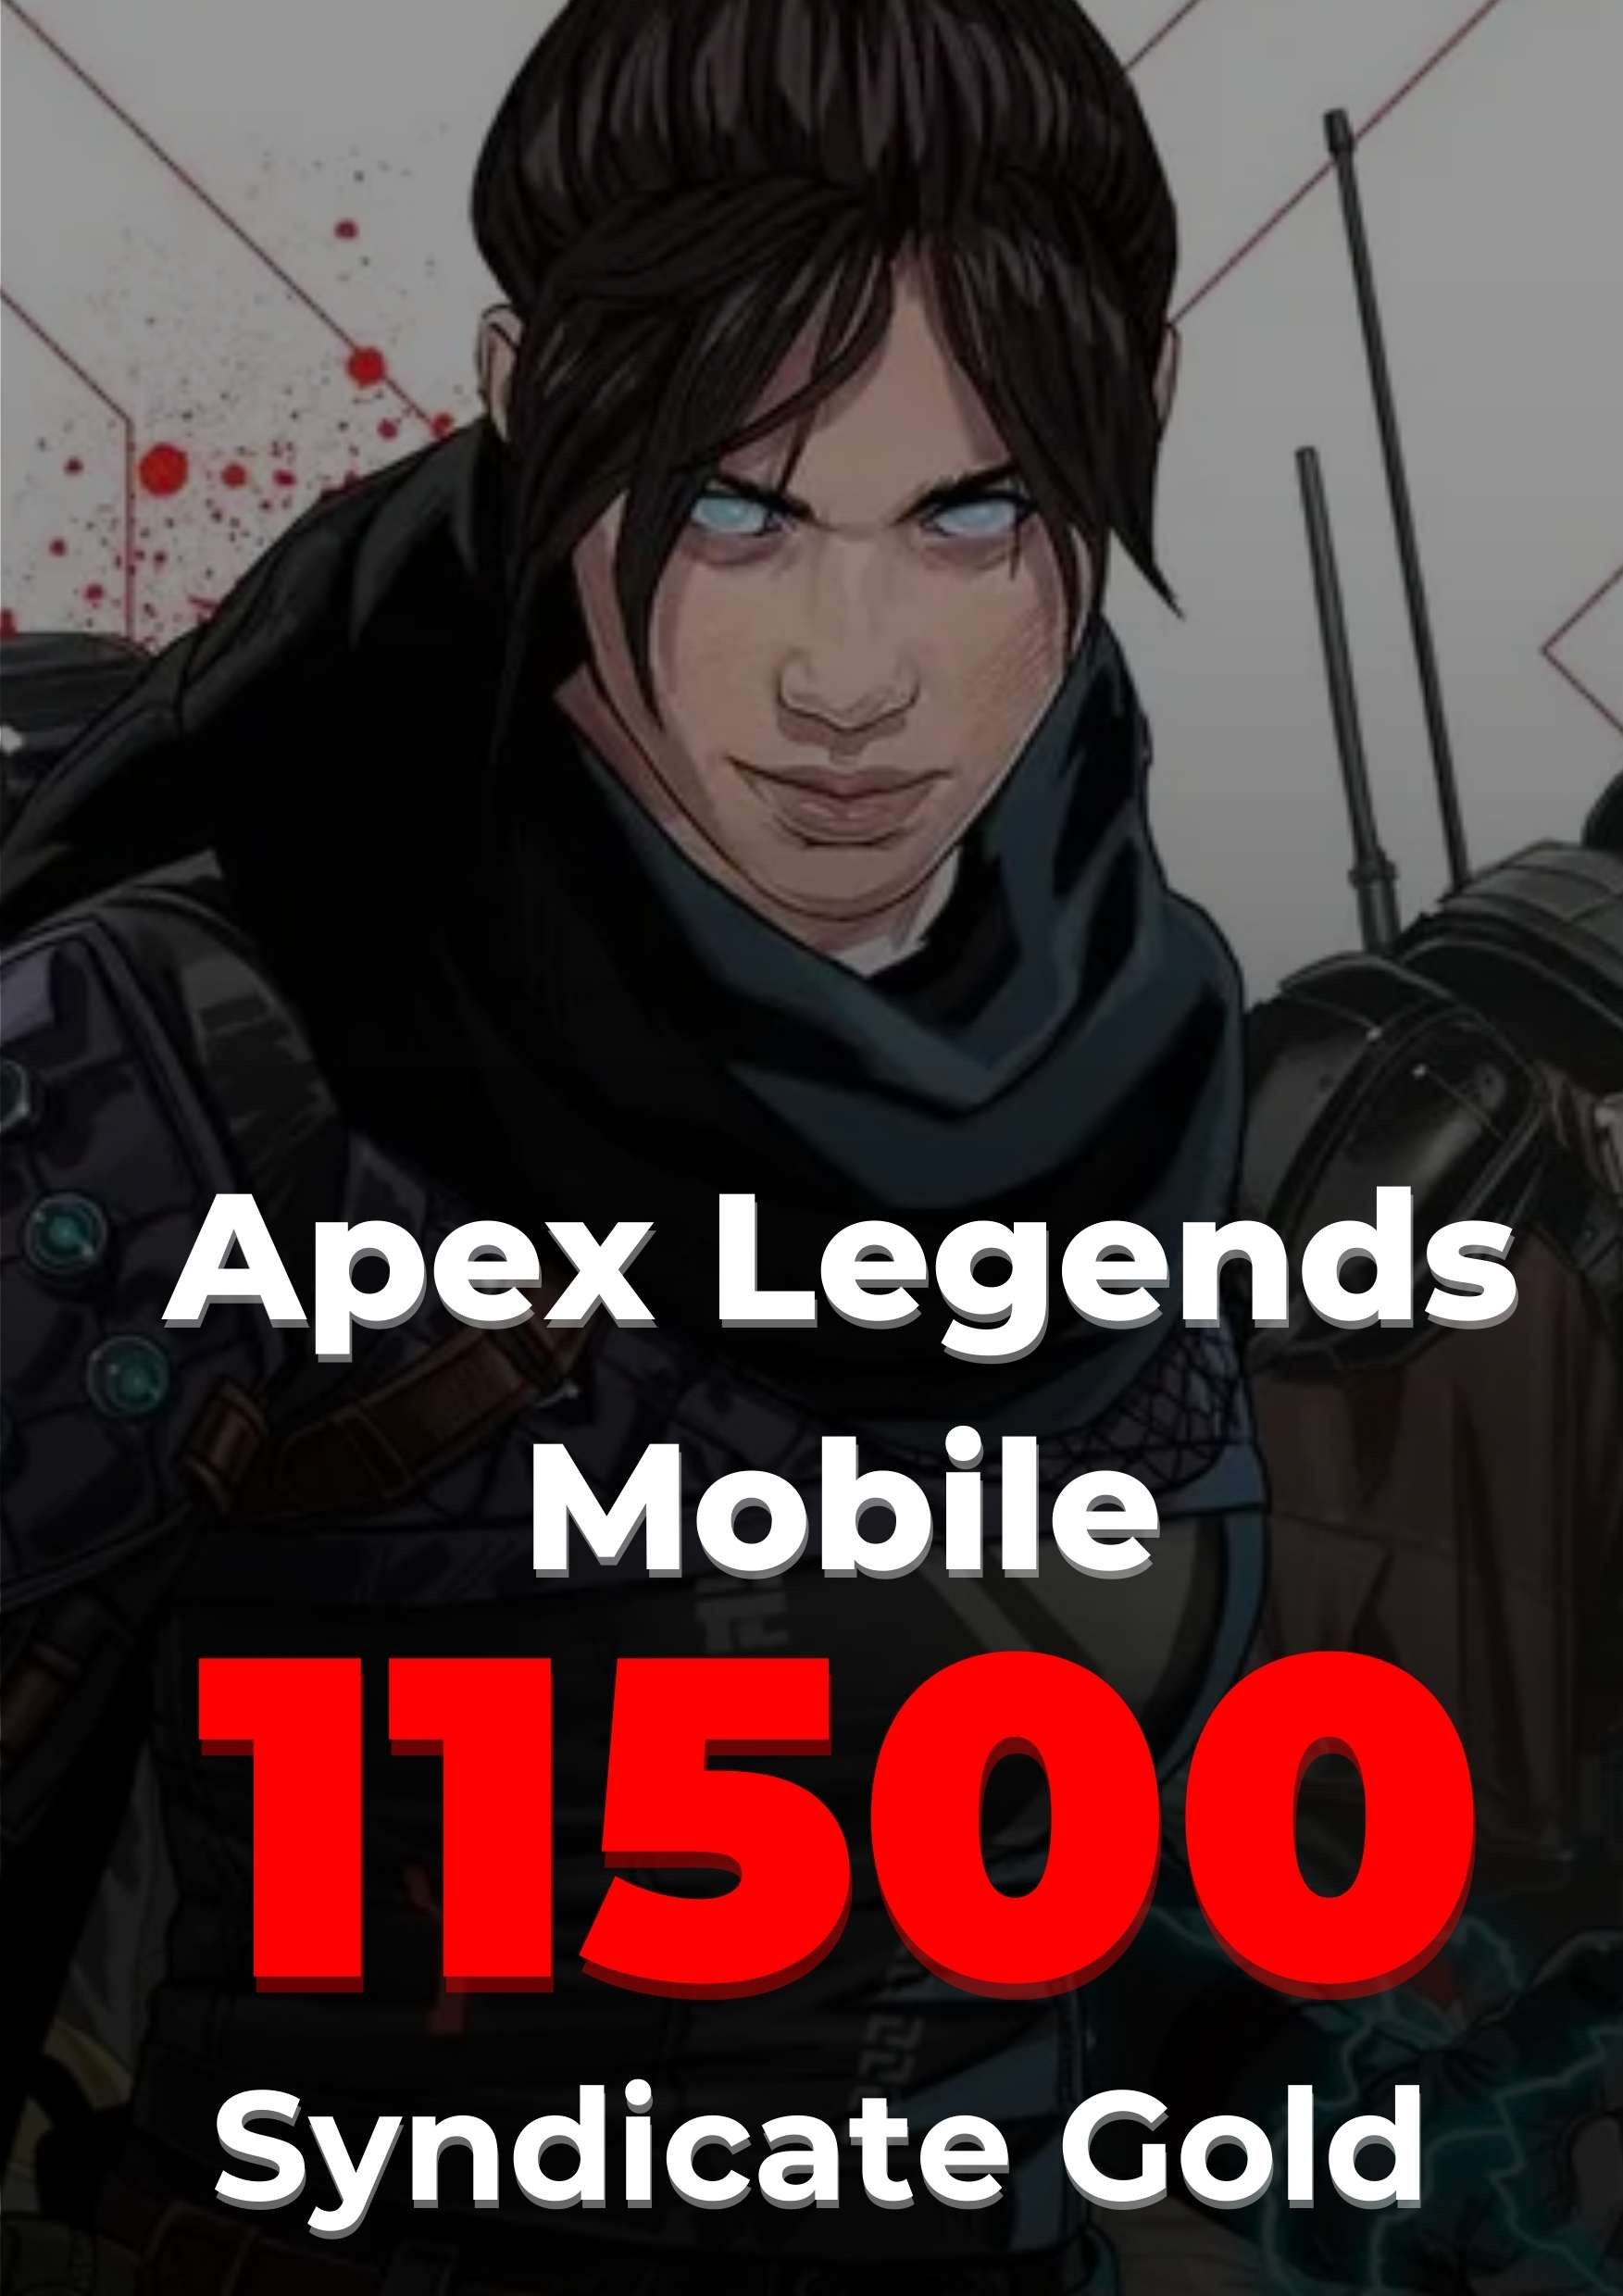 Apex Legends Mobile 11500 Syndicate Gold